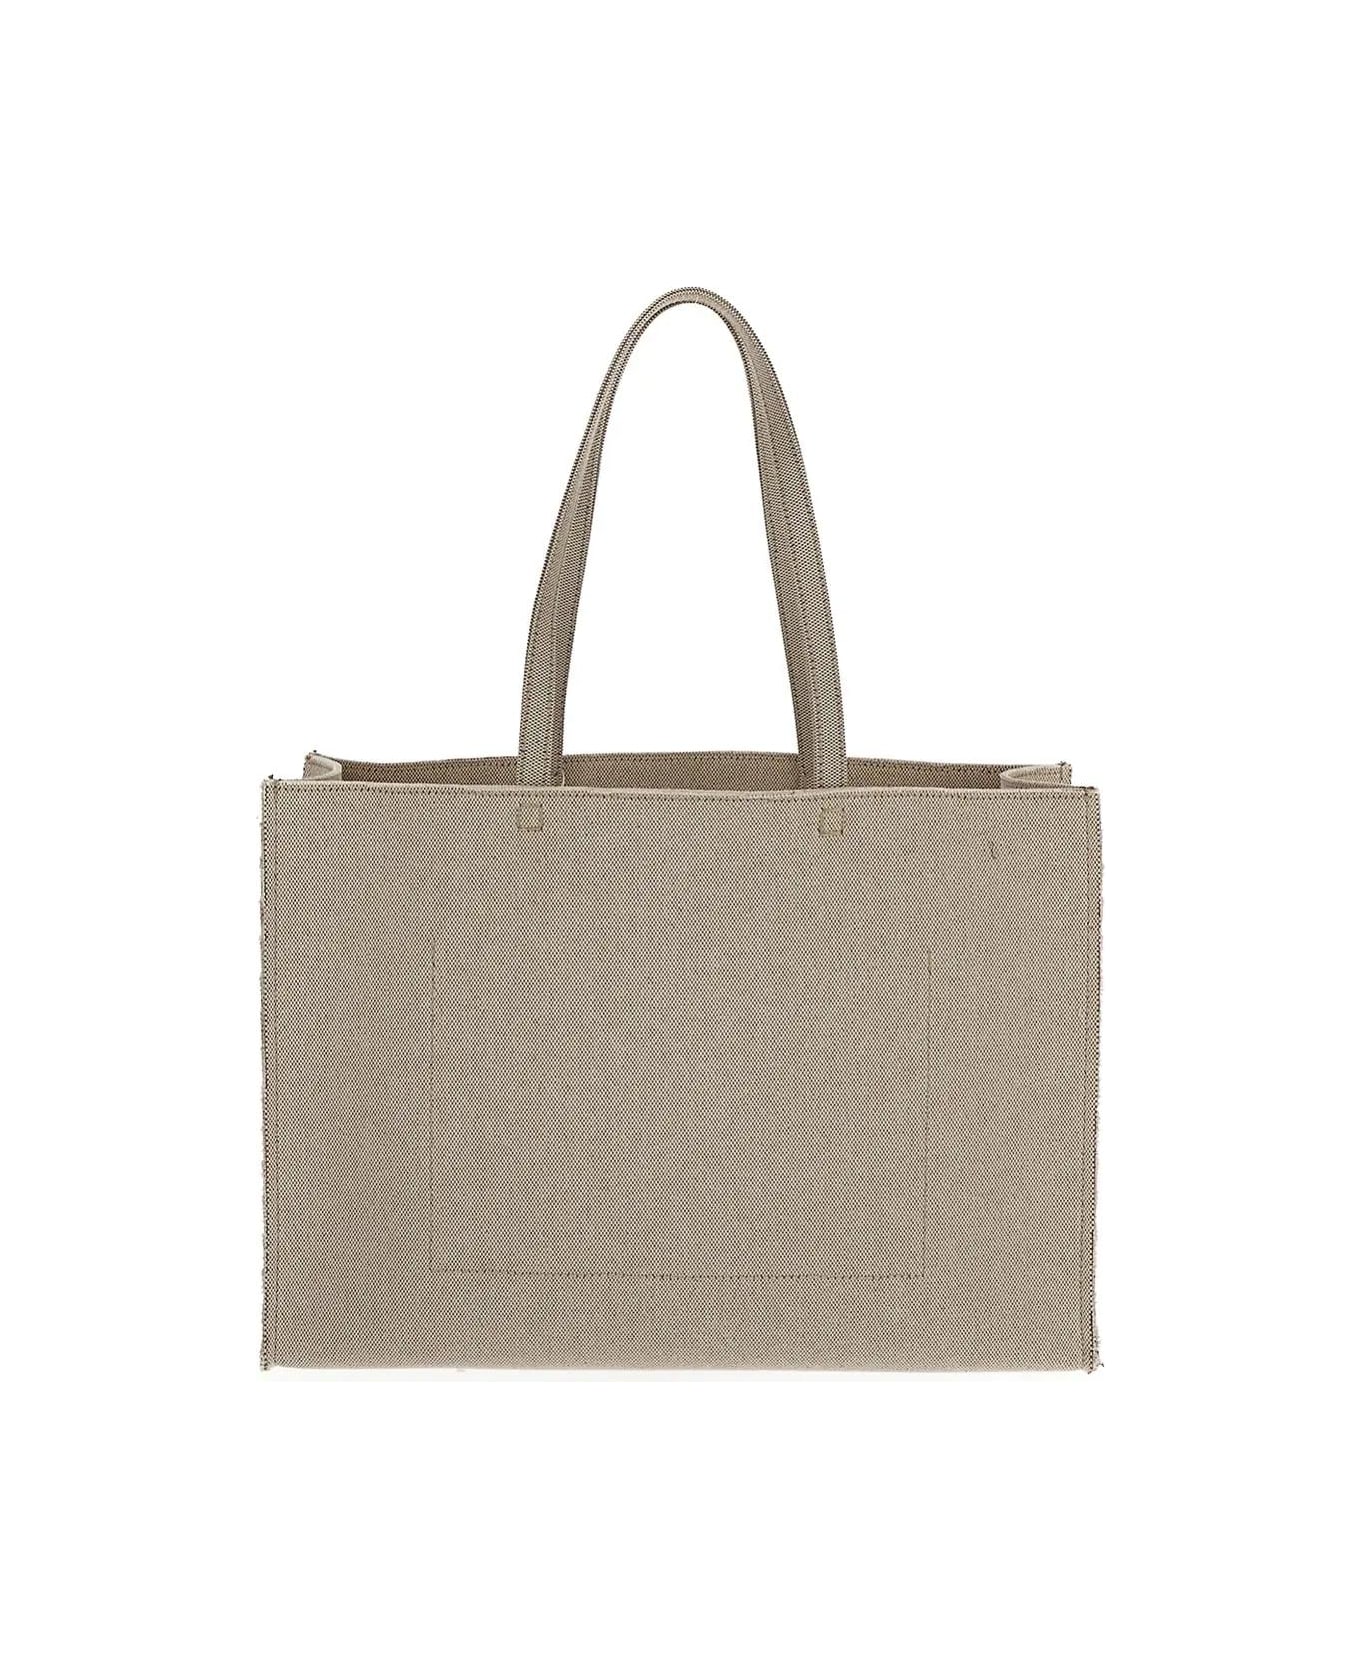 Givenchy Large G Tote Shopping Bag - Beige